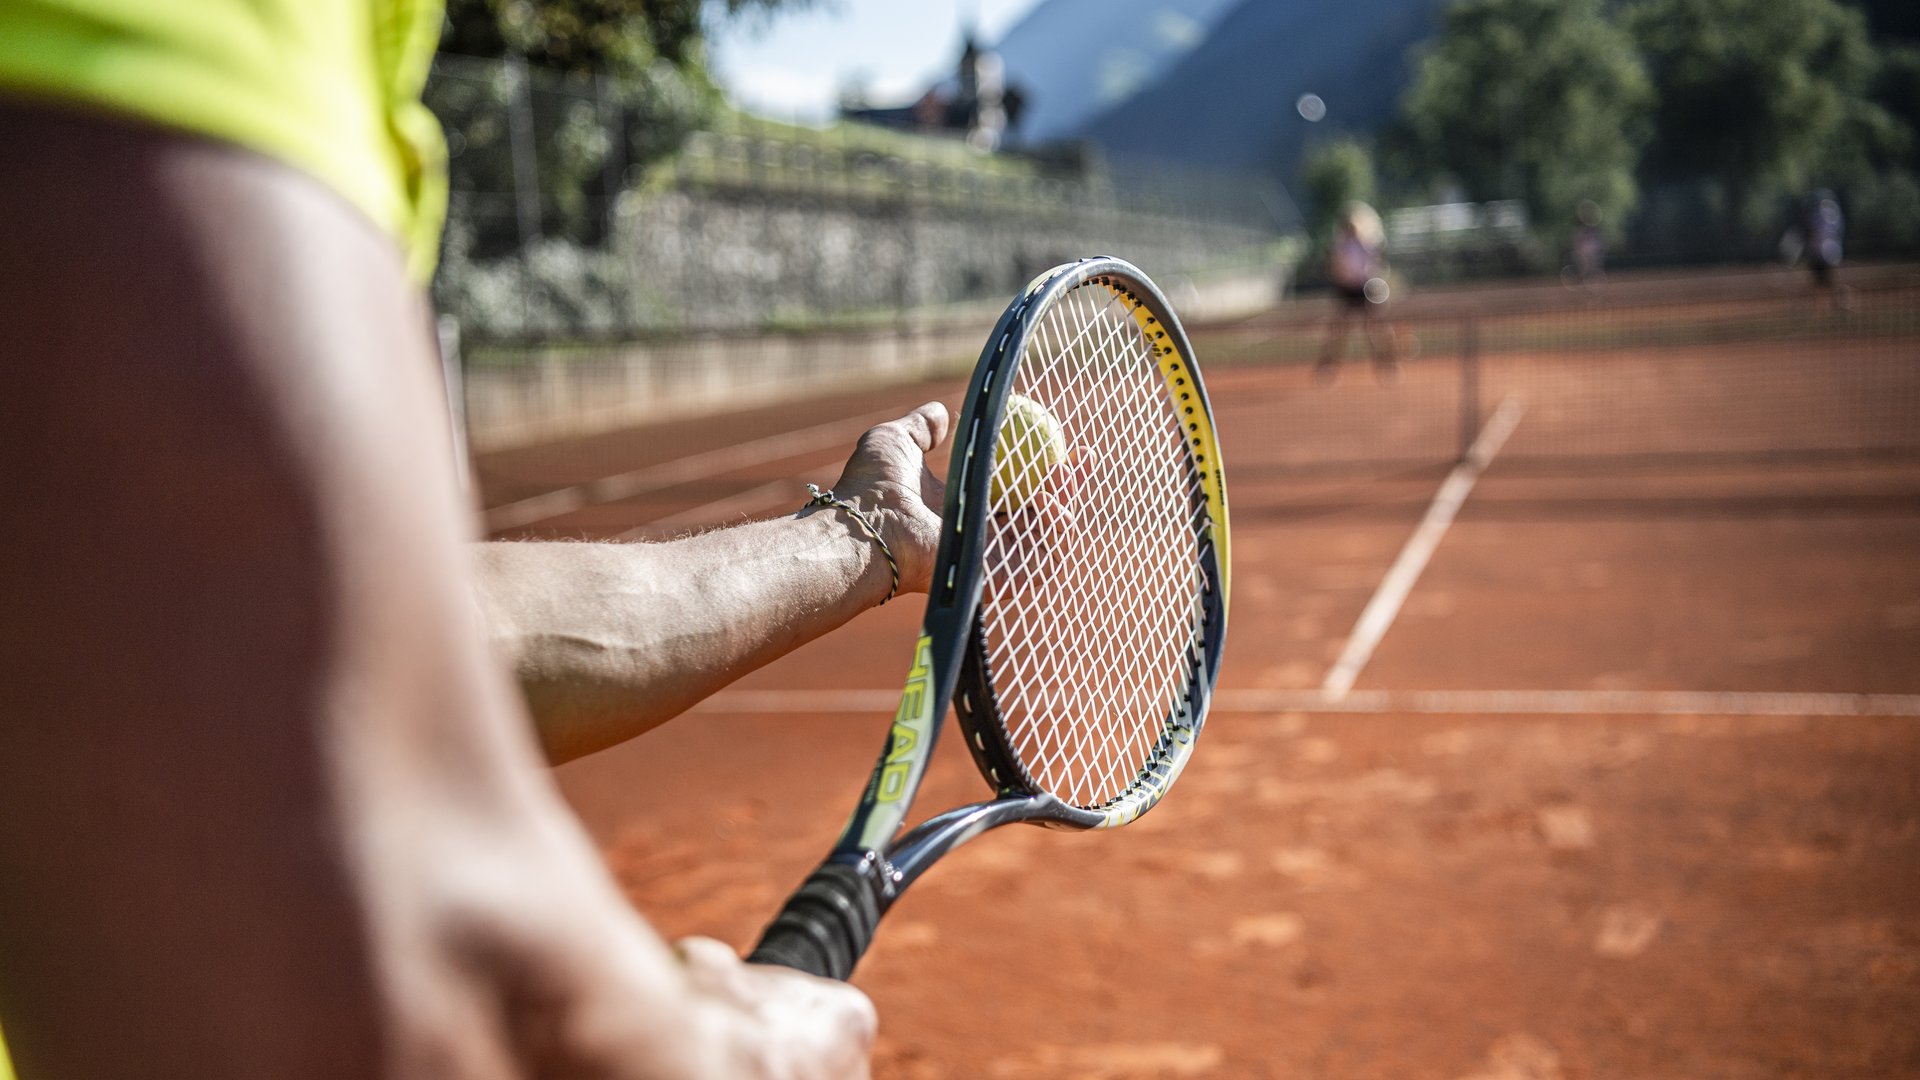 The Stroblhof, your tennis hotel in South Tyrol